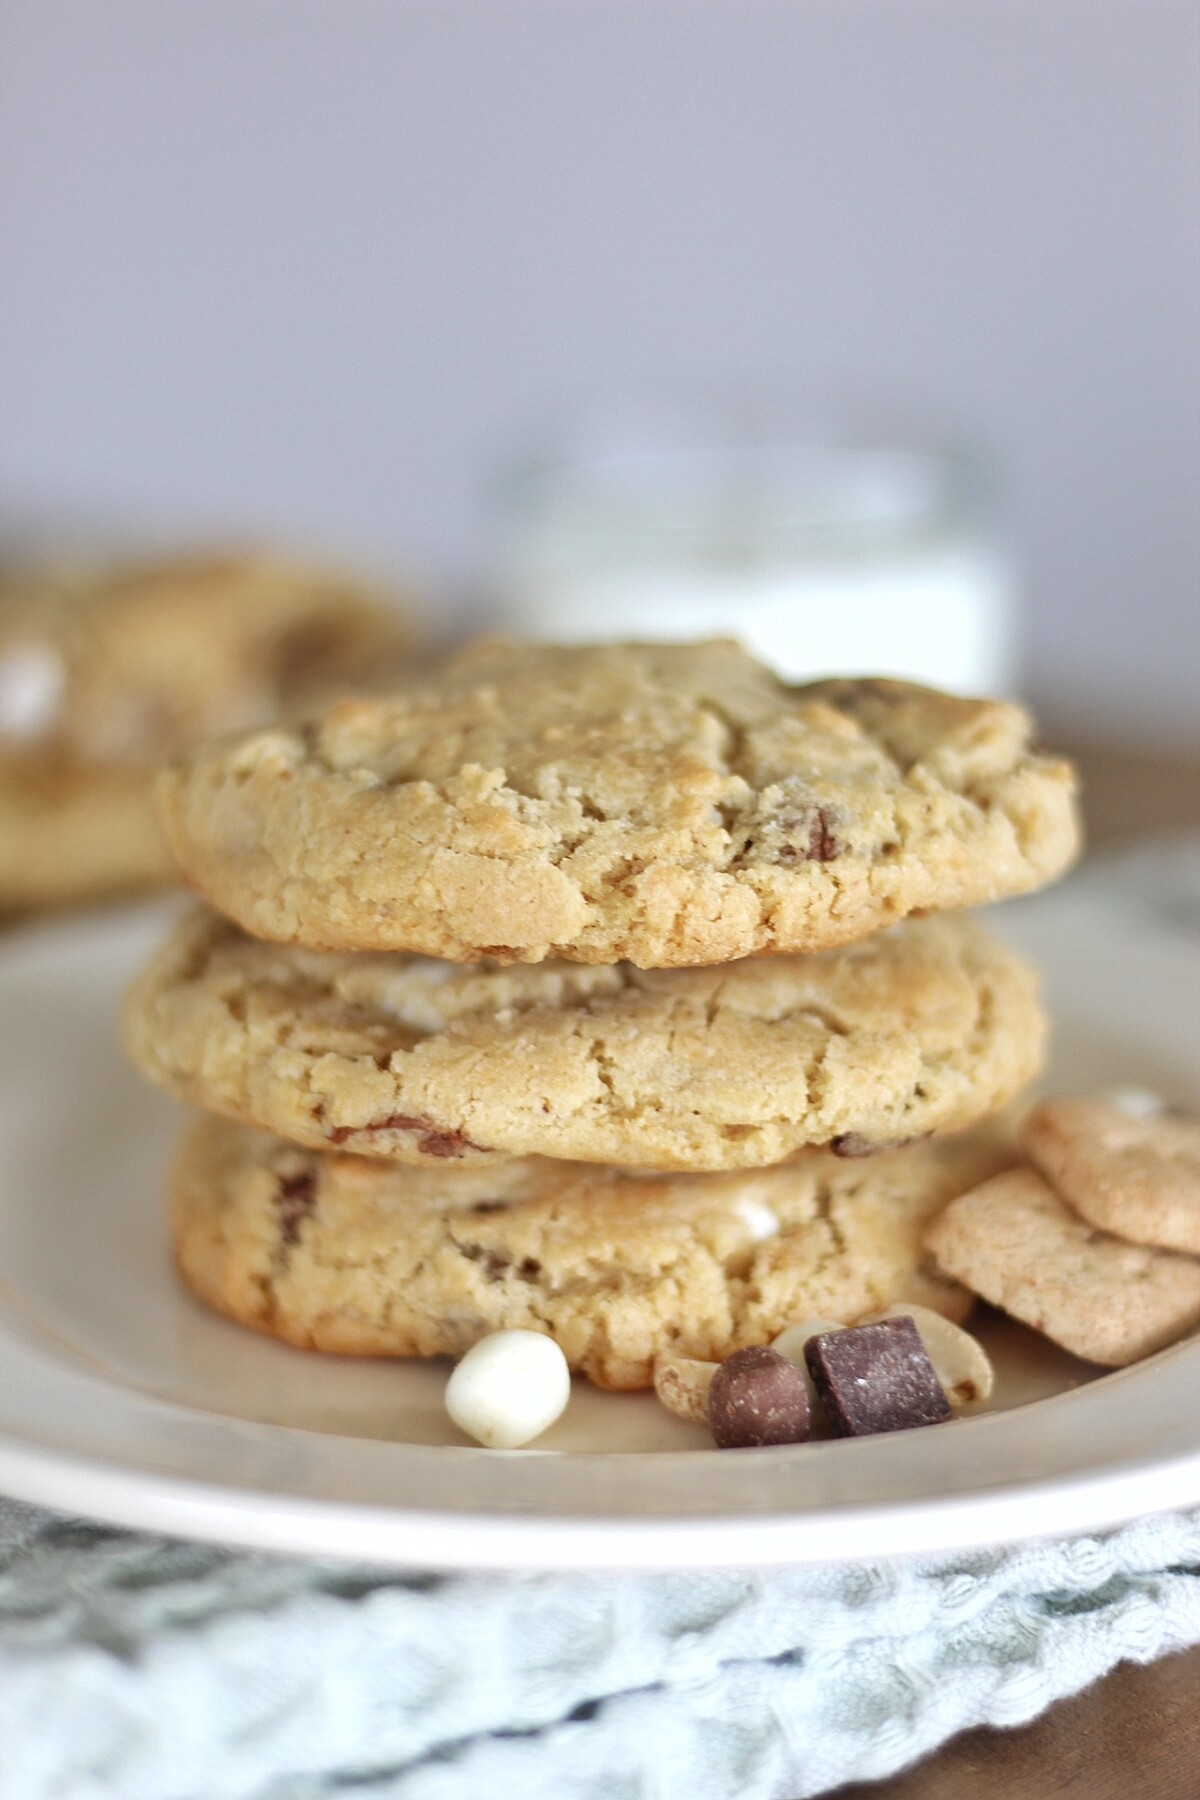 brown butter s'mores cookies. www.cakebycourtney.com